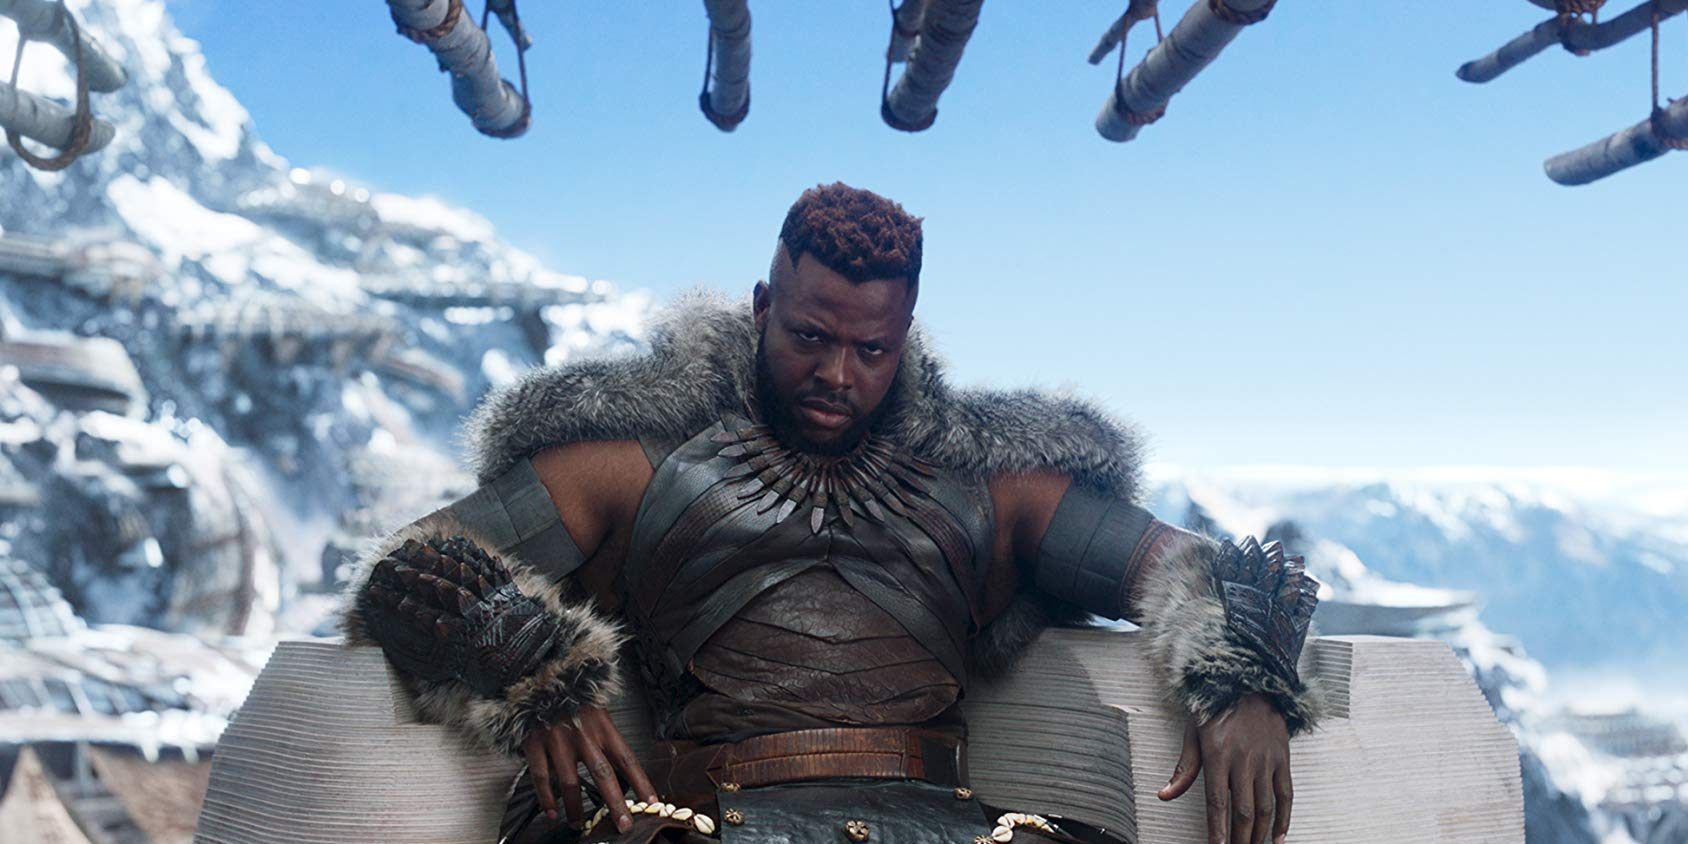 M'Baku sits on his throne in Black Panther